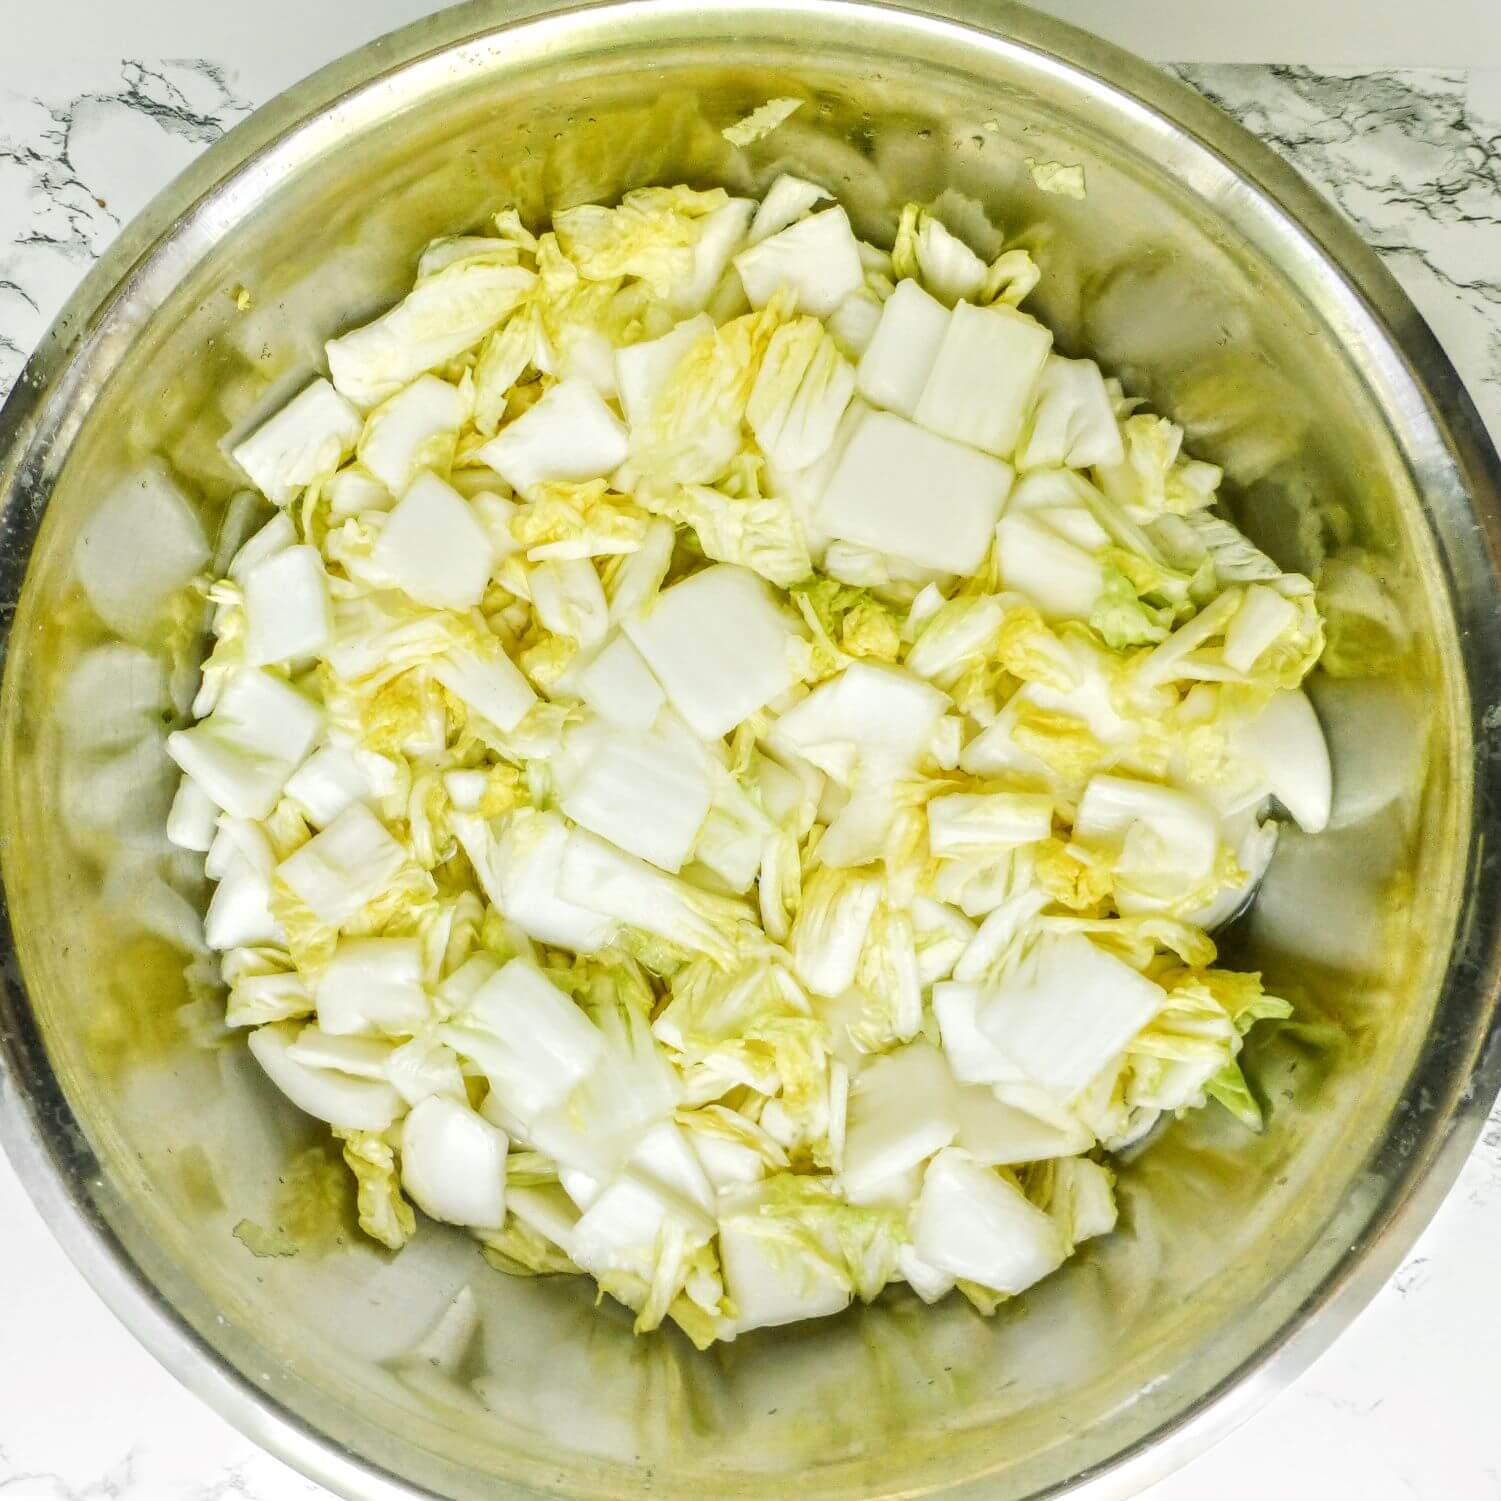 Large bowl containing cut napa cabbage